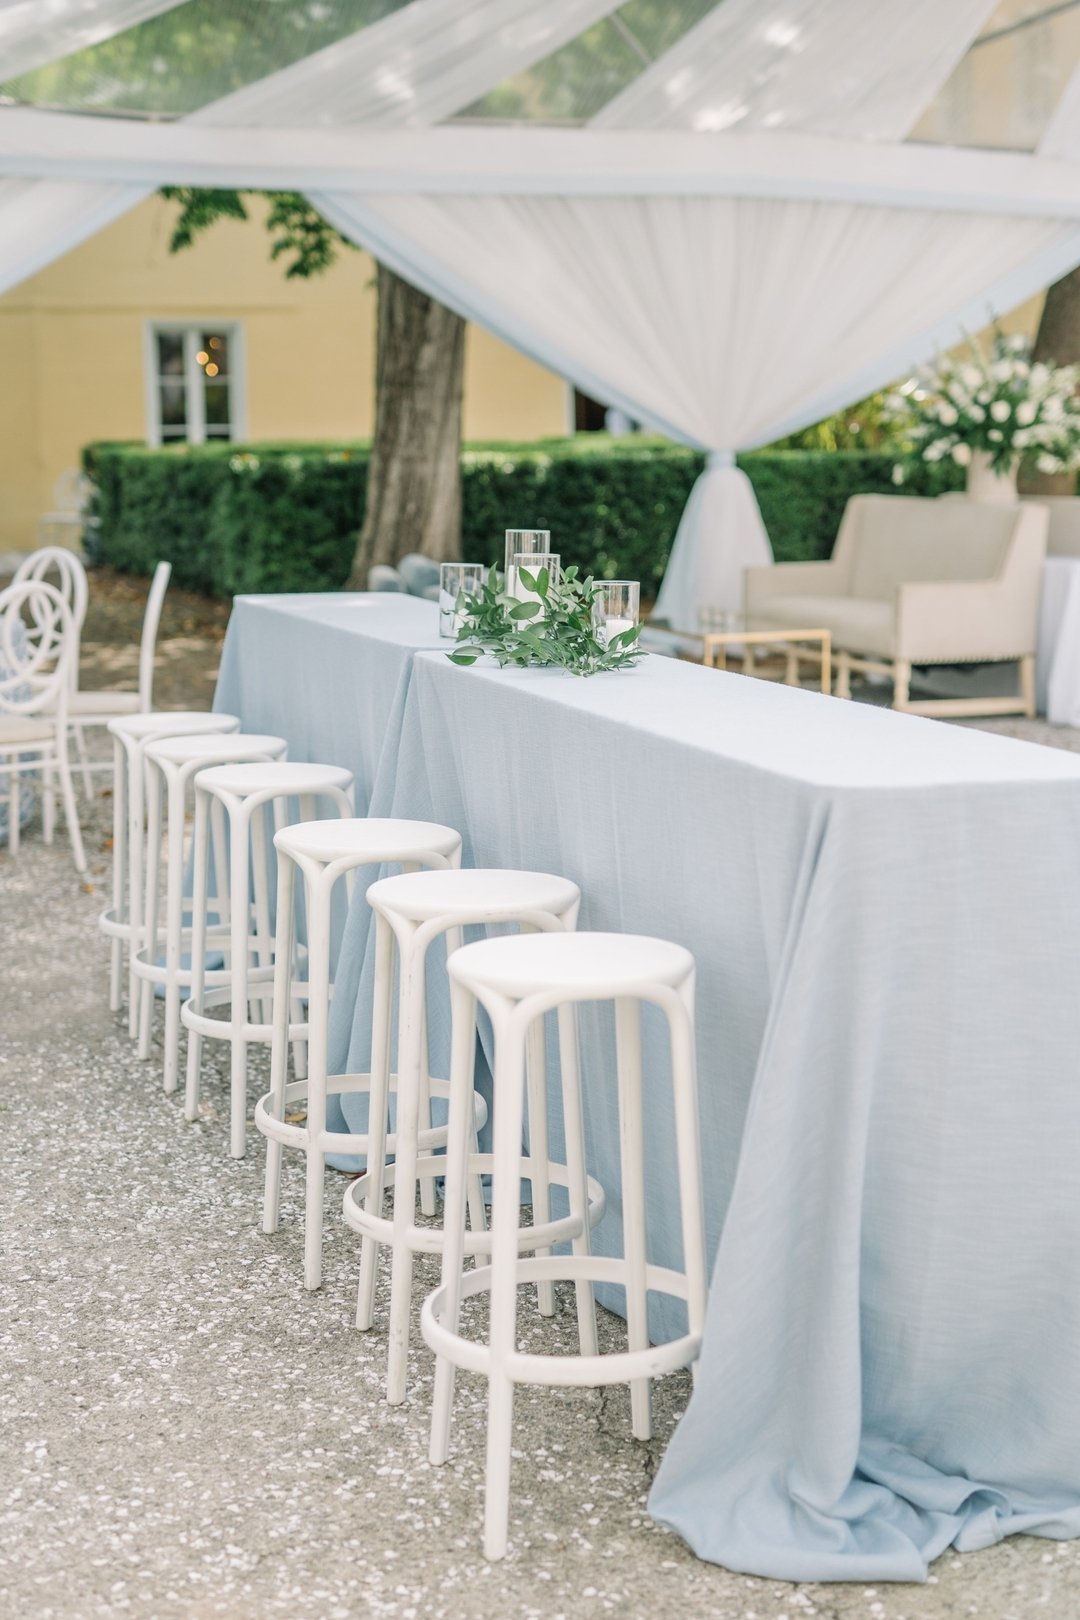 An added touch of blue for a cohesive calm and serene reception vibes 🩵🤍🩵
.
.
.
#somethingblue #bluetablecloth #bluelinedcurtains #bluetabbedvalance #tabbedvalance #oversizedtentcurtains #overlappingtentcurtains #linedcurtains #tentdrape #tentdrap